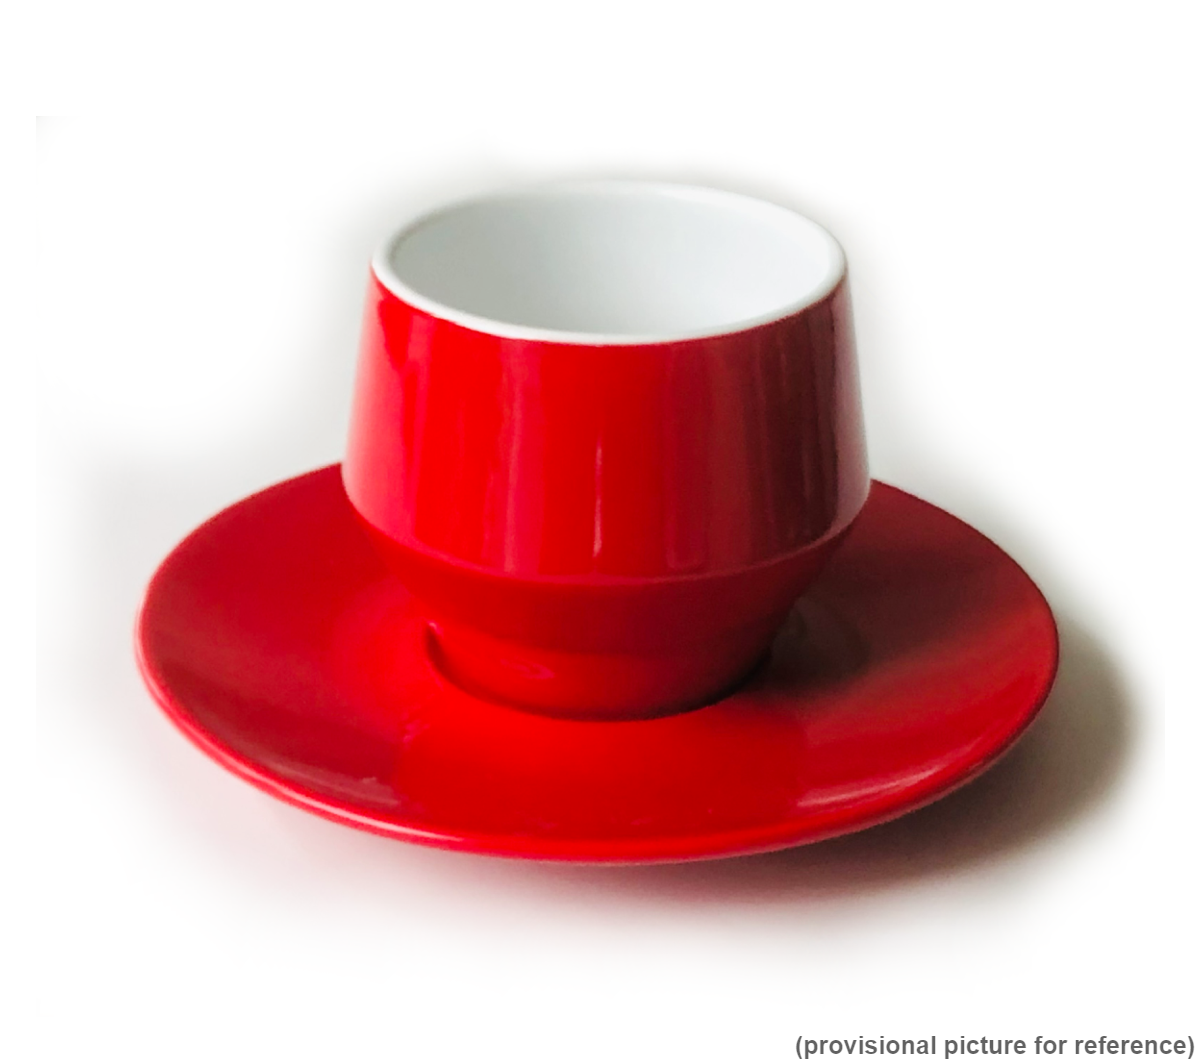 "MANIKO" Double-Walled RED - 205ml Cappuccino Cups